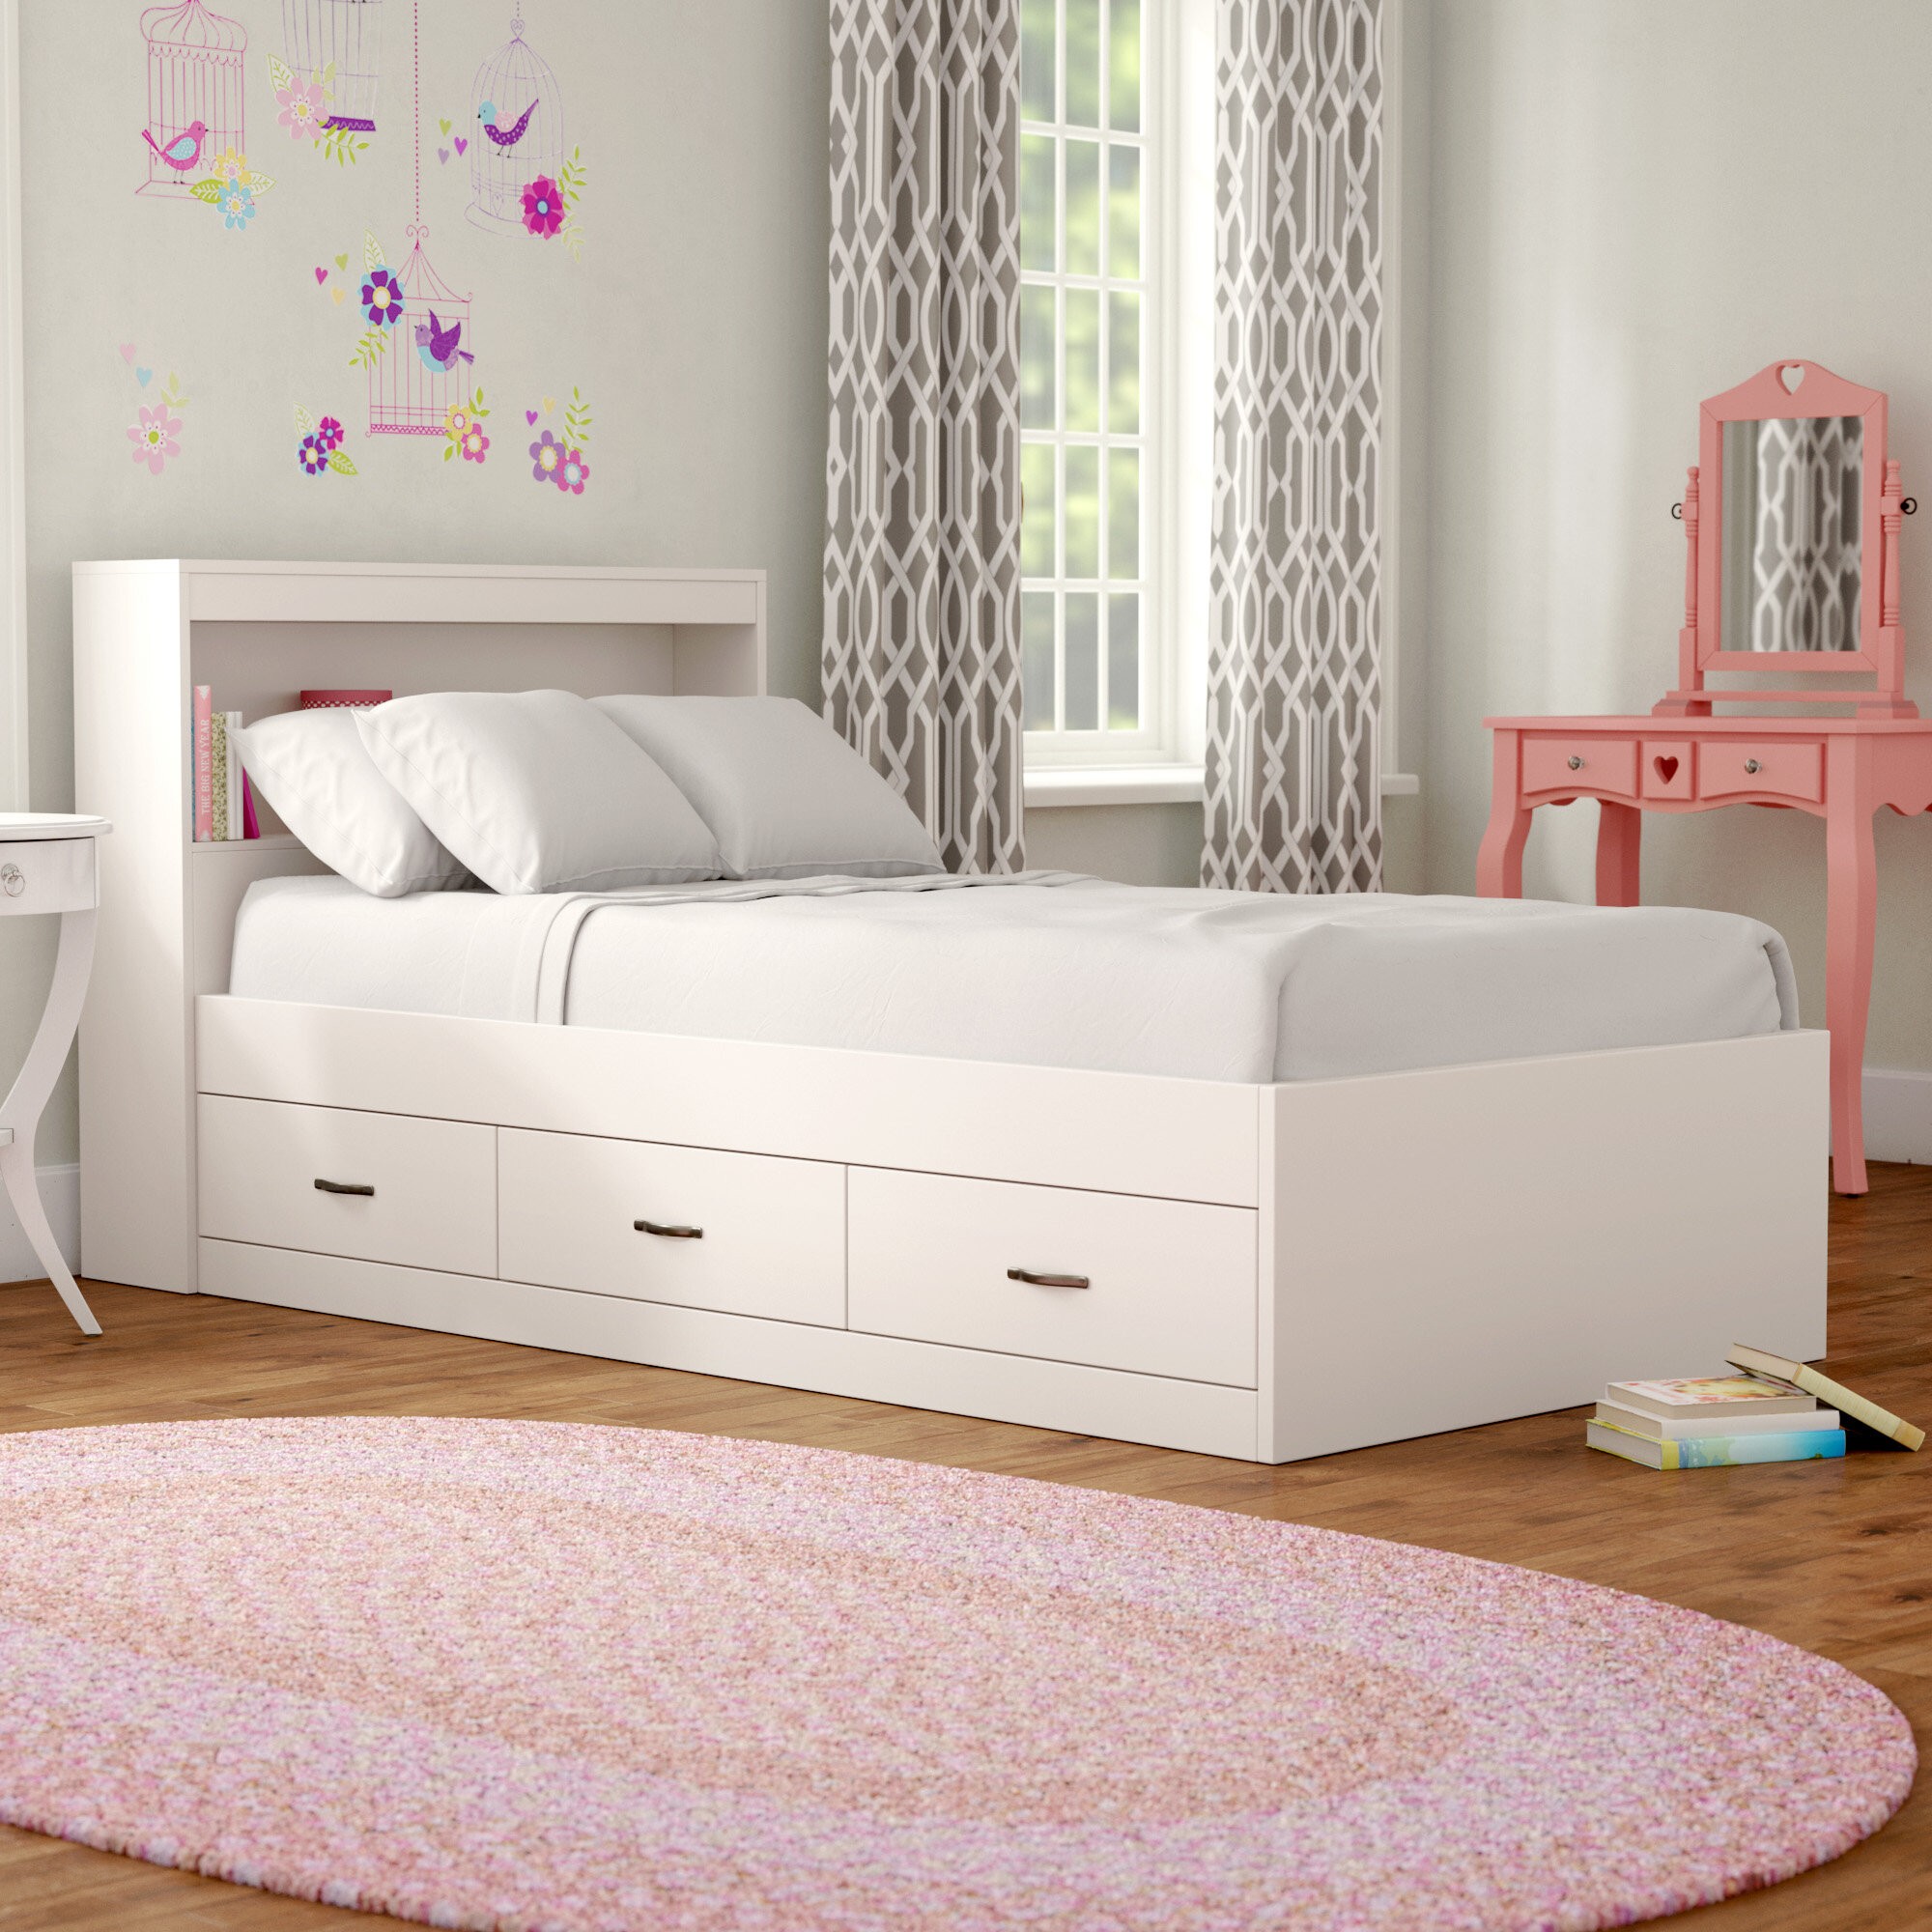 Keira Platform Bed with Drawers and Bookcase